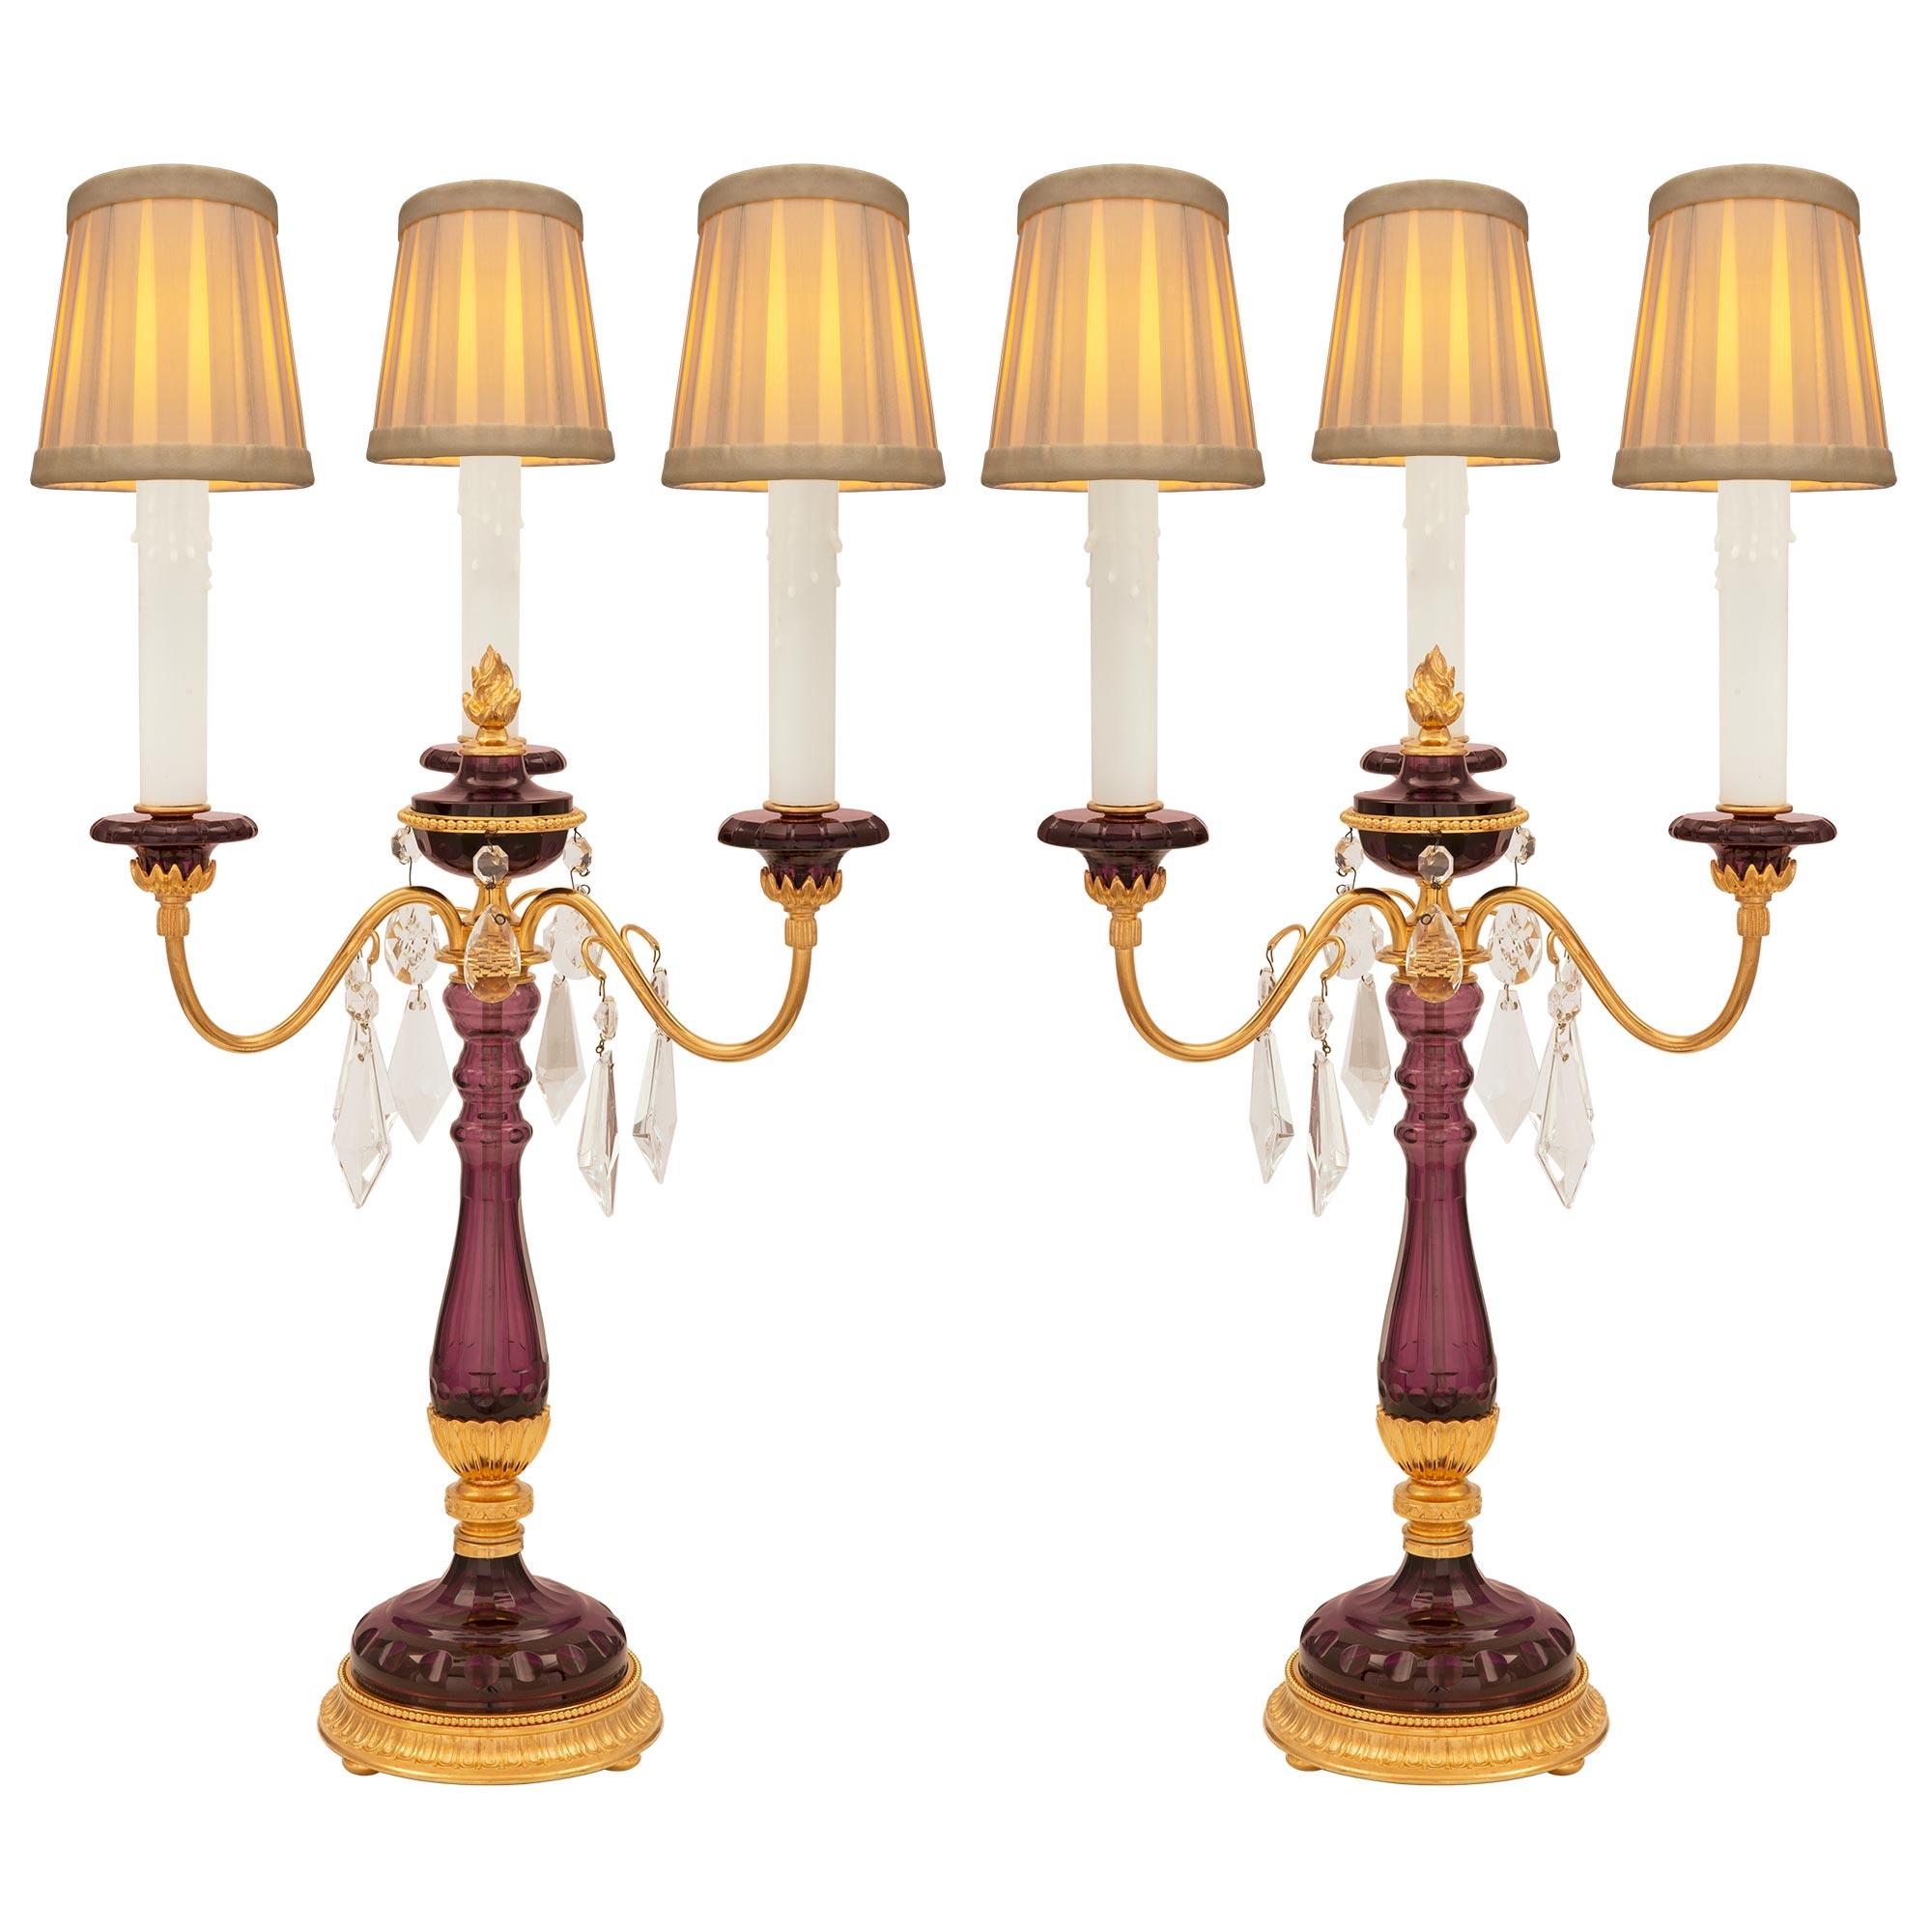 A beautiful and unique pair of French turn of the century Louis XVI st. amethyst colored glass, ormolu, and crystal candelabra lamps. Each three arm lamp is raised by an elegant circular ormolu base with bun feet and a fine wrap around curved reeded